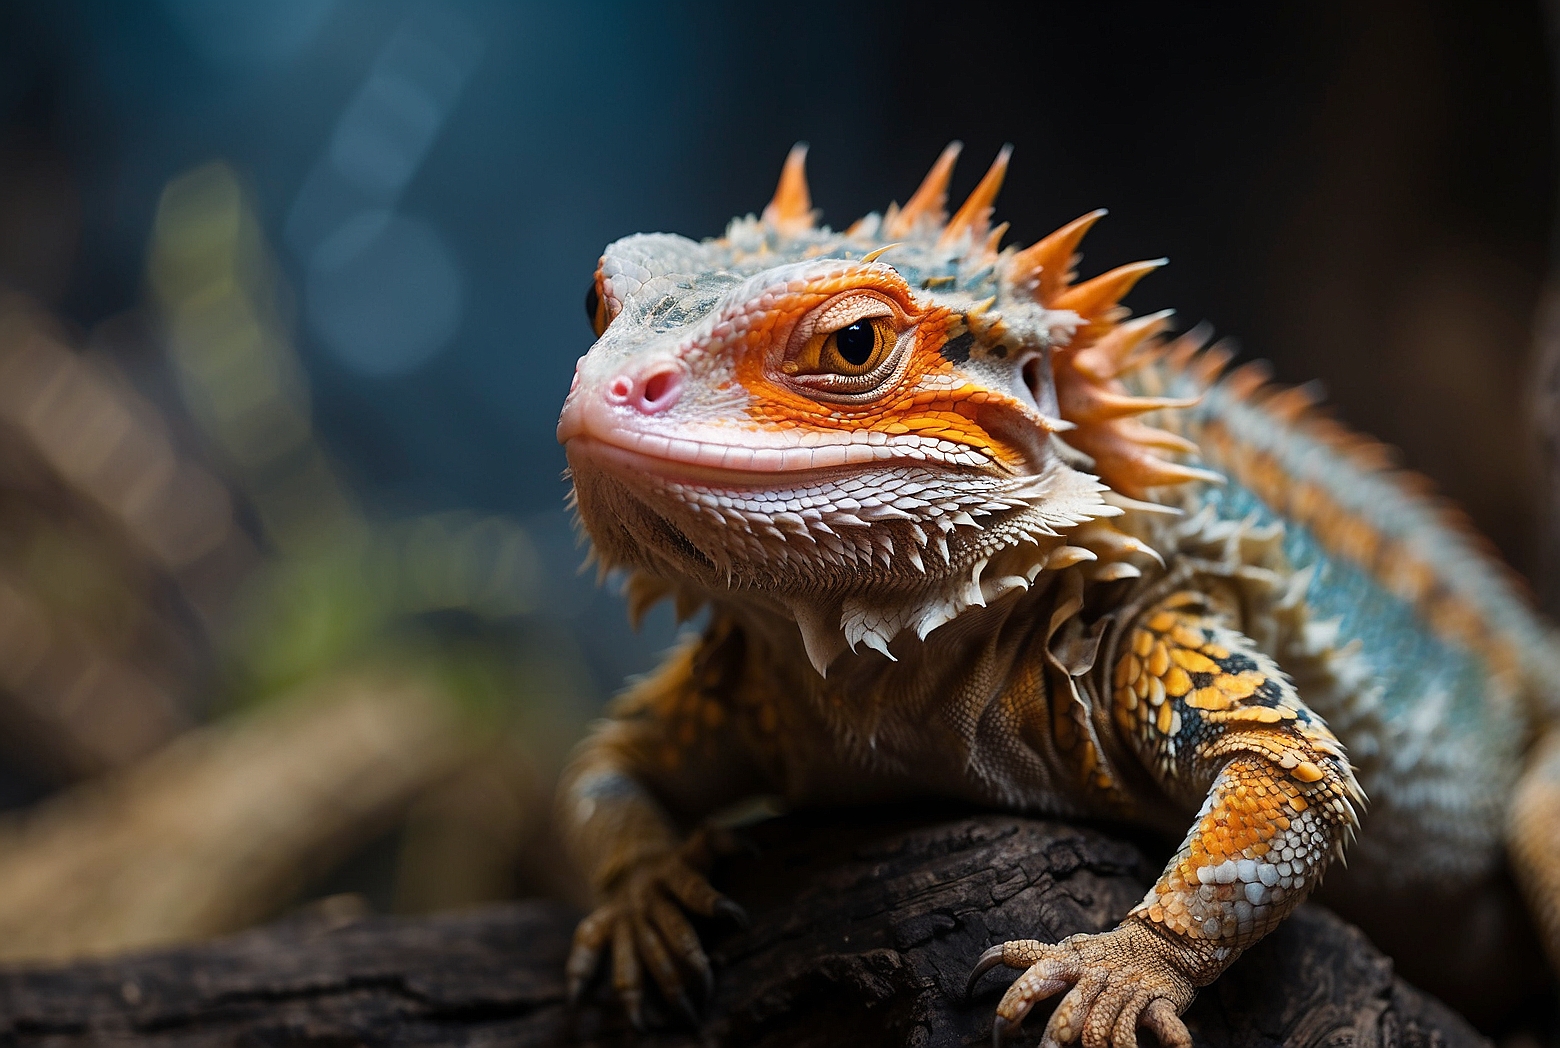 What Do Bearded Dragons Love The Most?